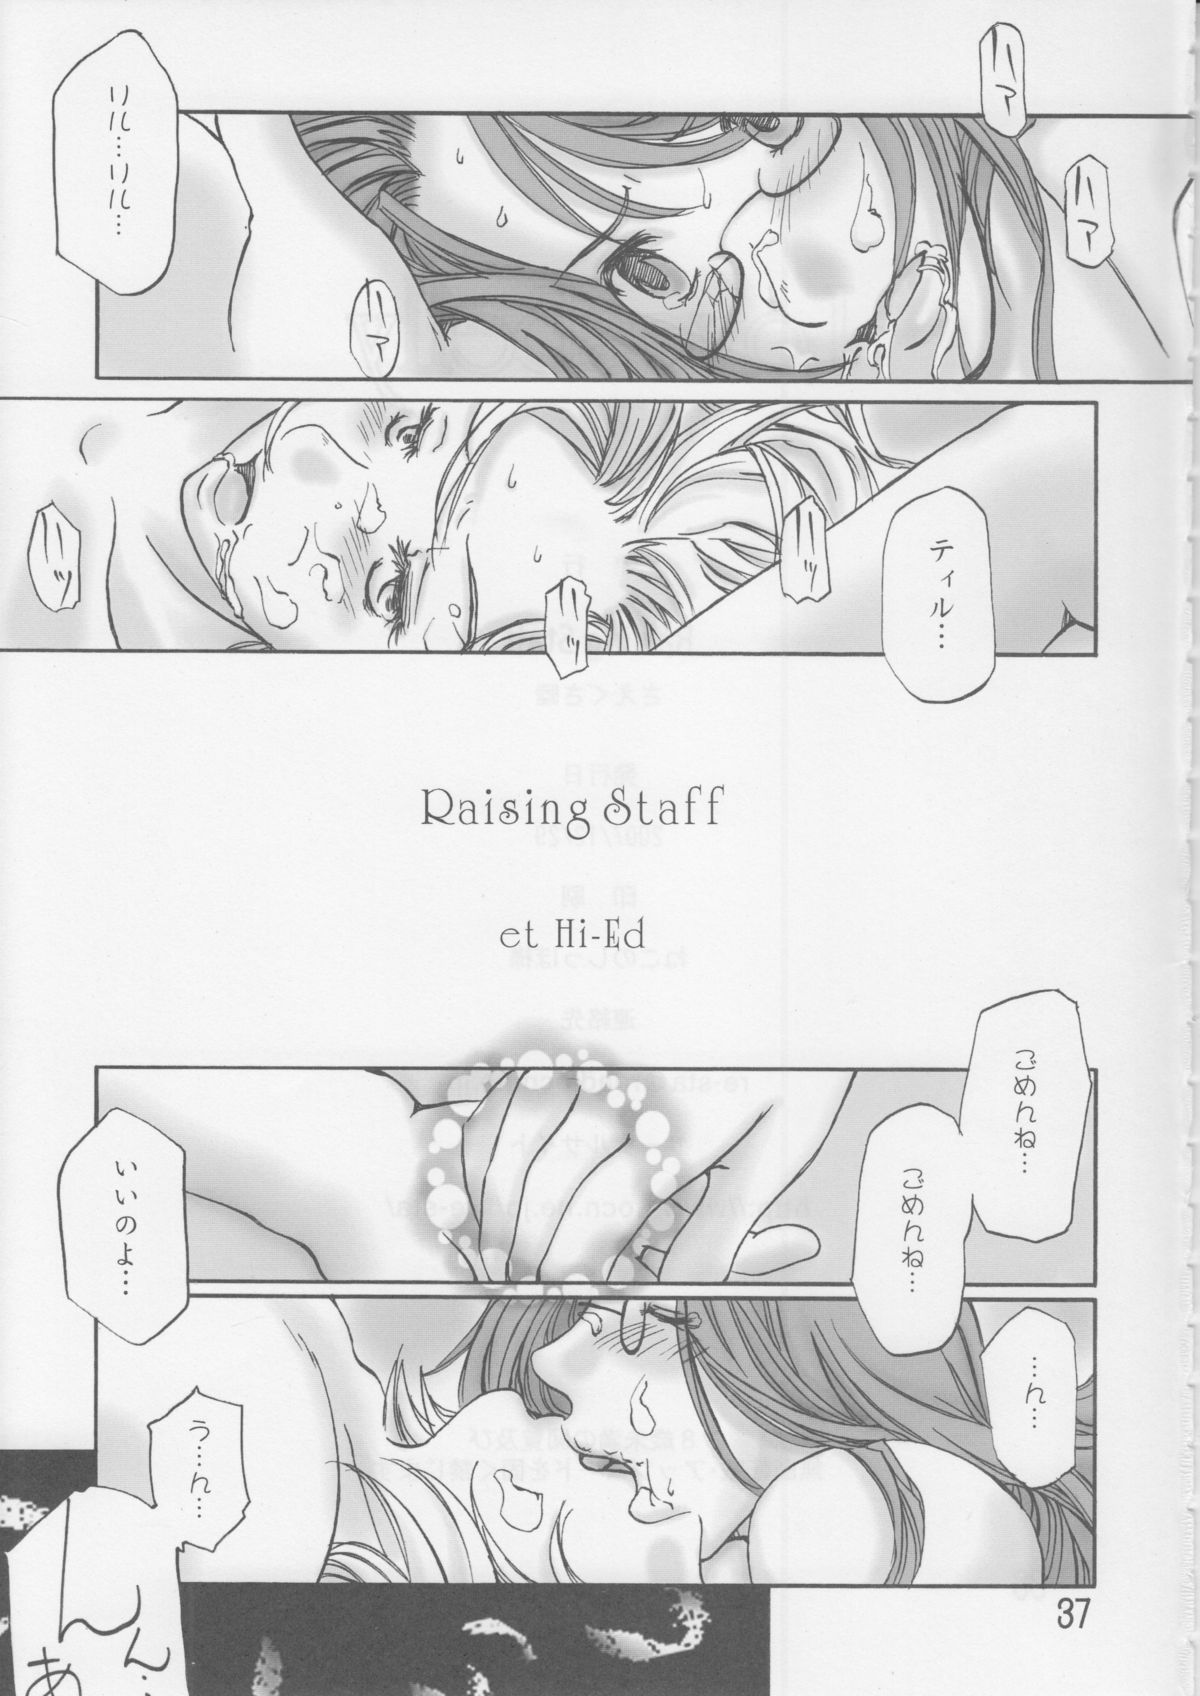 [Raising Staff] Loves Belly (Final Fantasy XI) page 39 full